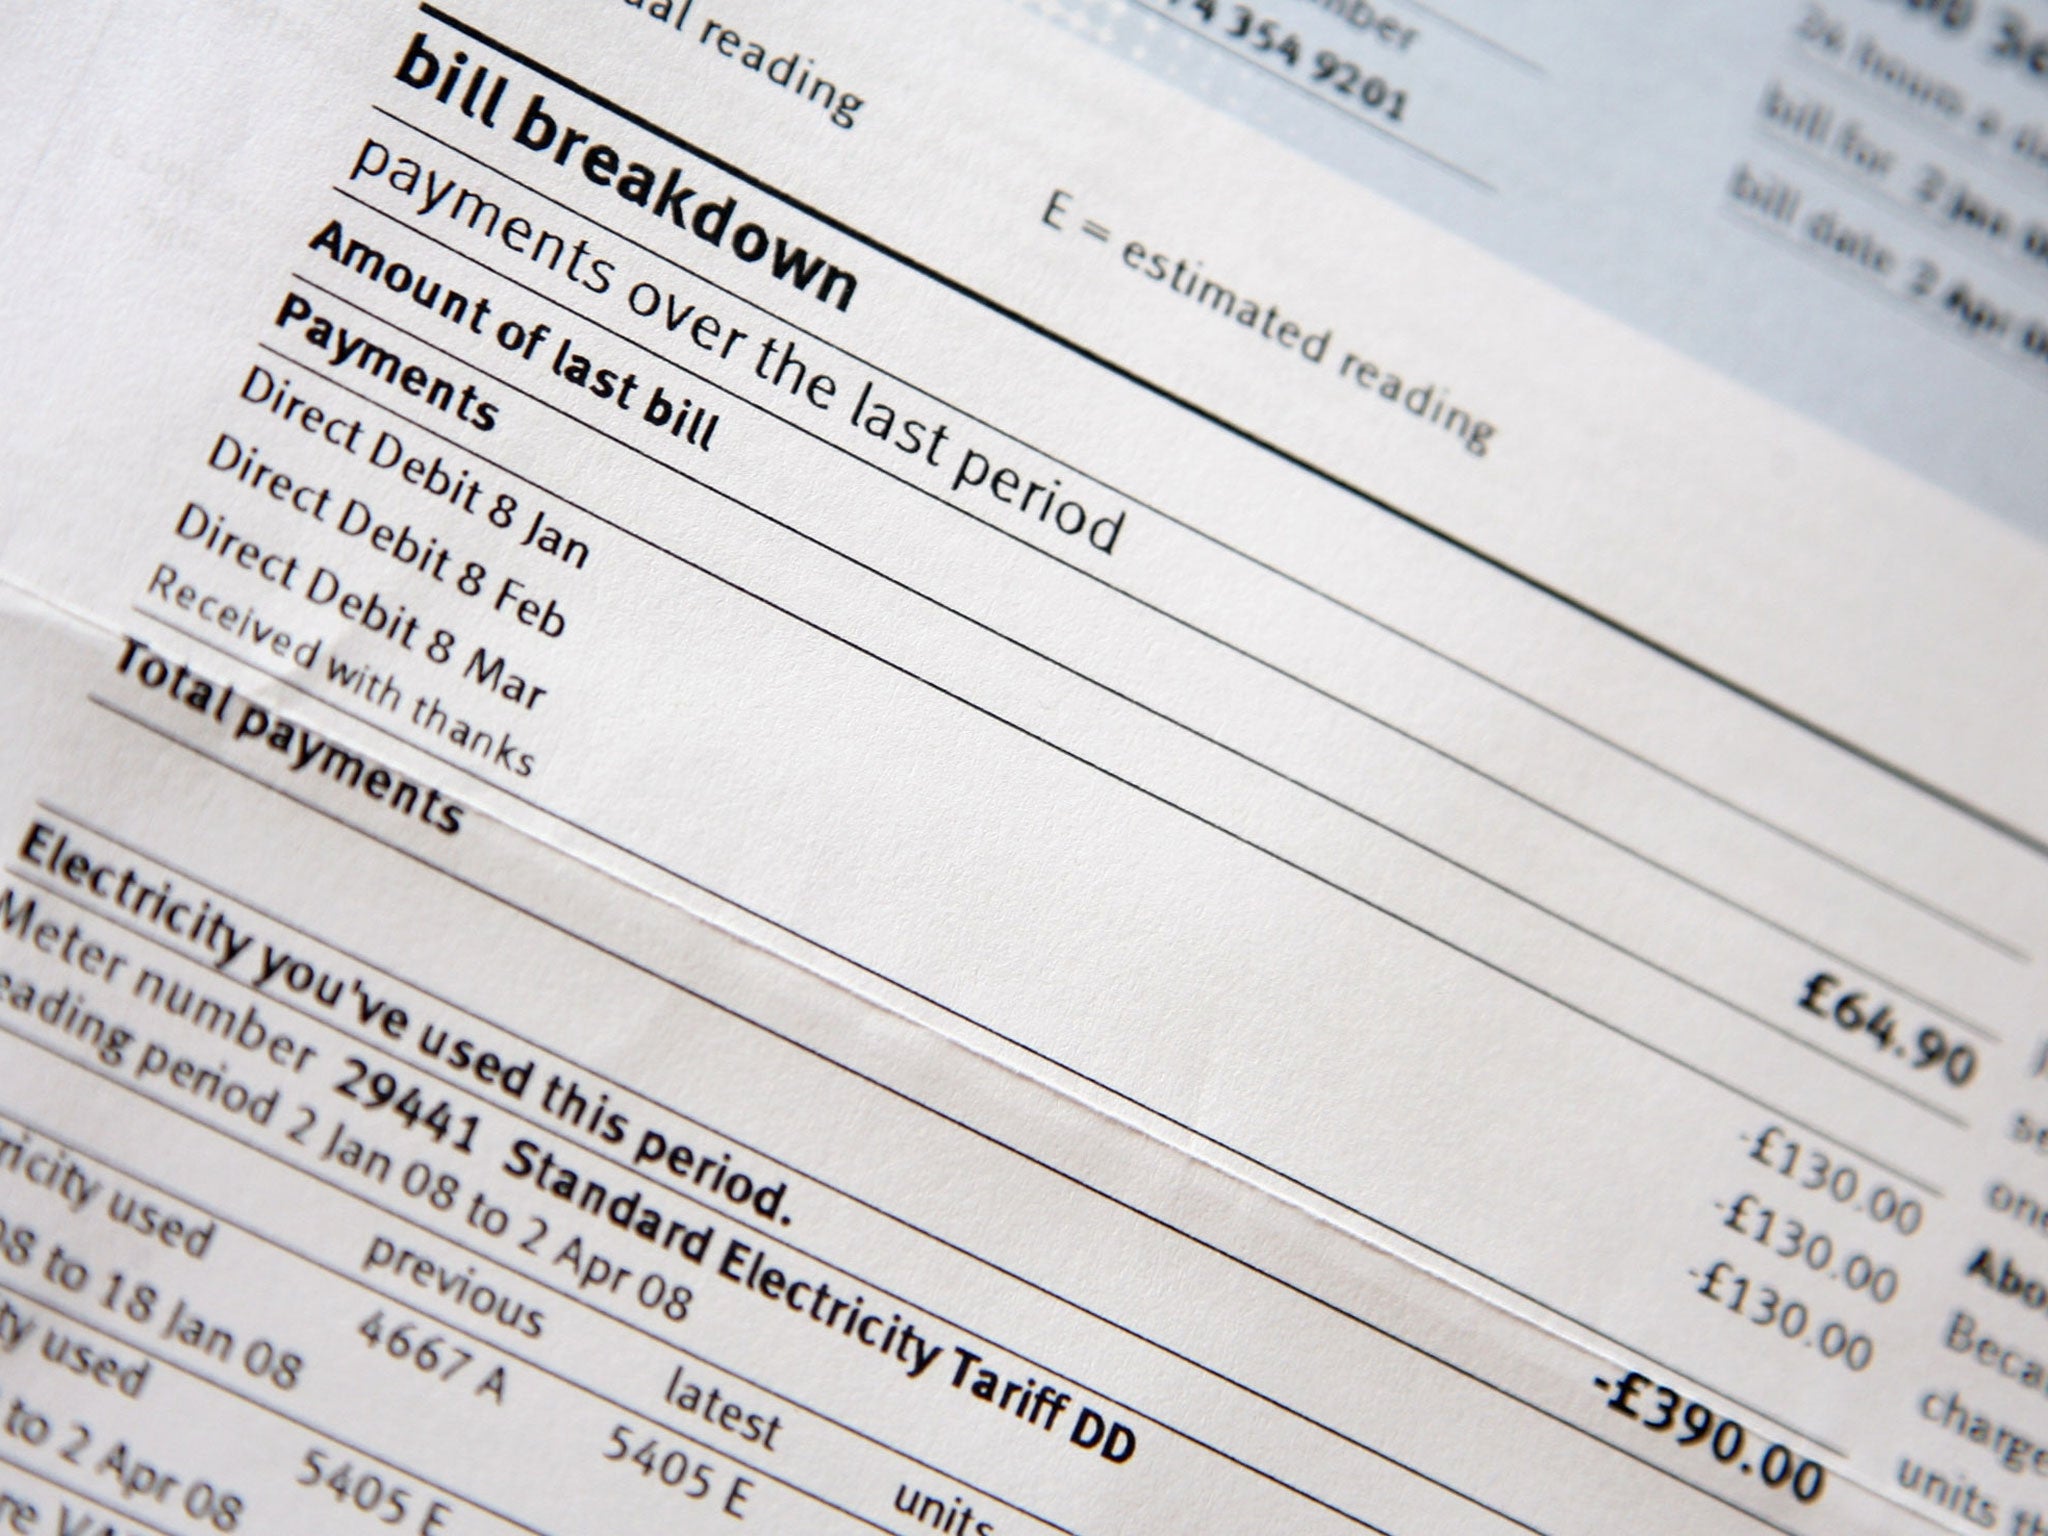 Energy bills are being artificially inflated by a lack of competition